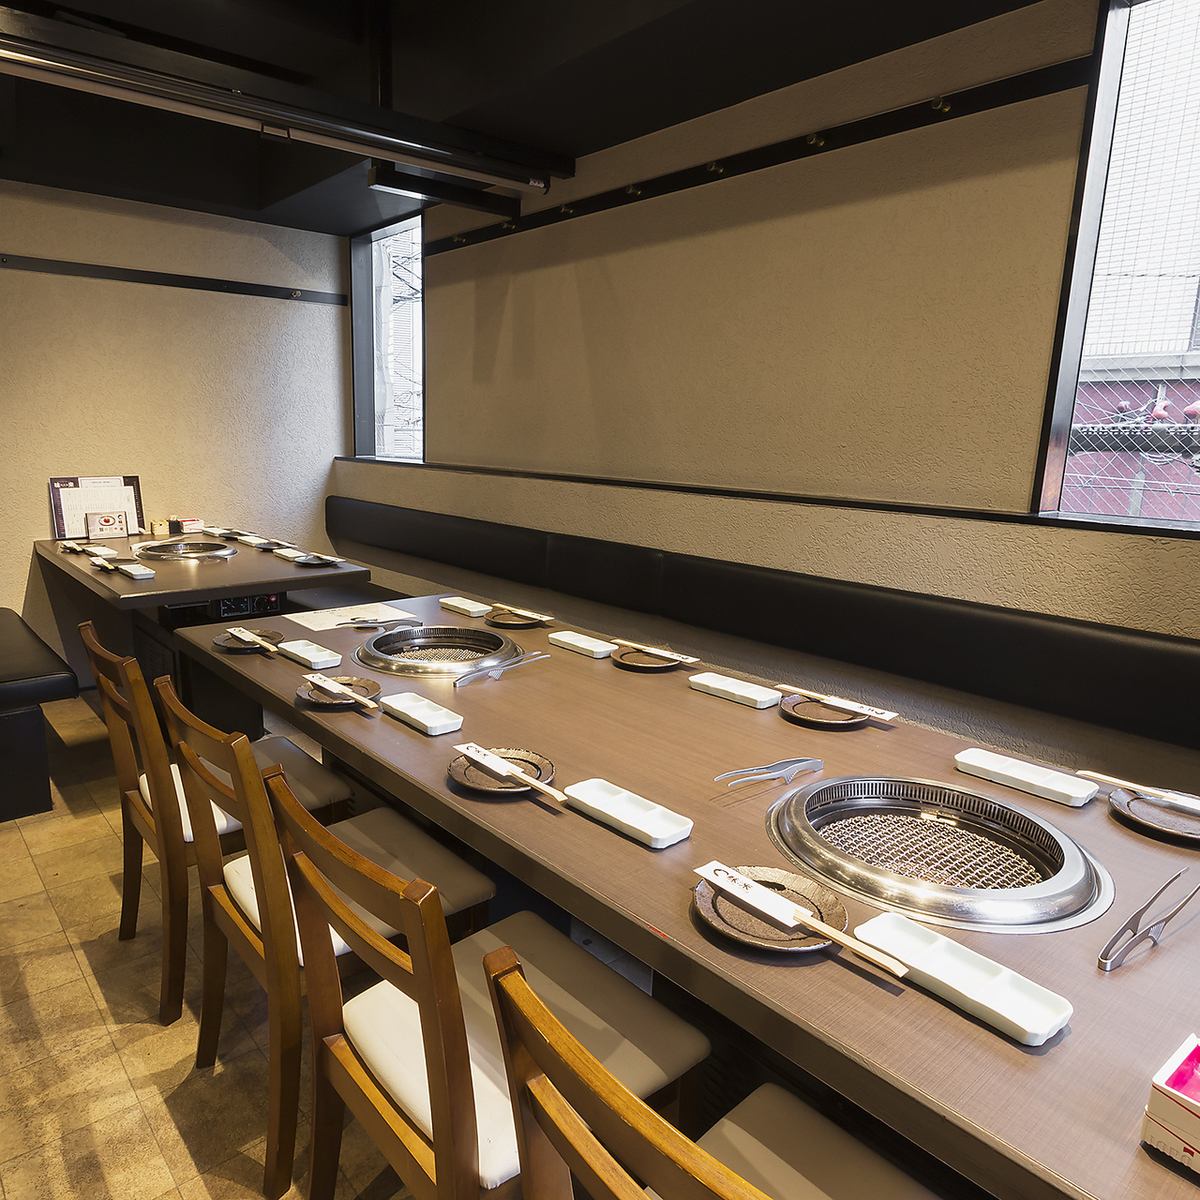 All seats are completely private rooms, so you can enjoy your meal without worrying about your surroundings.